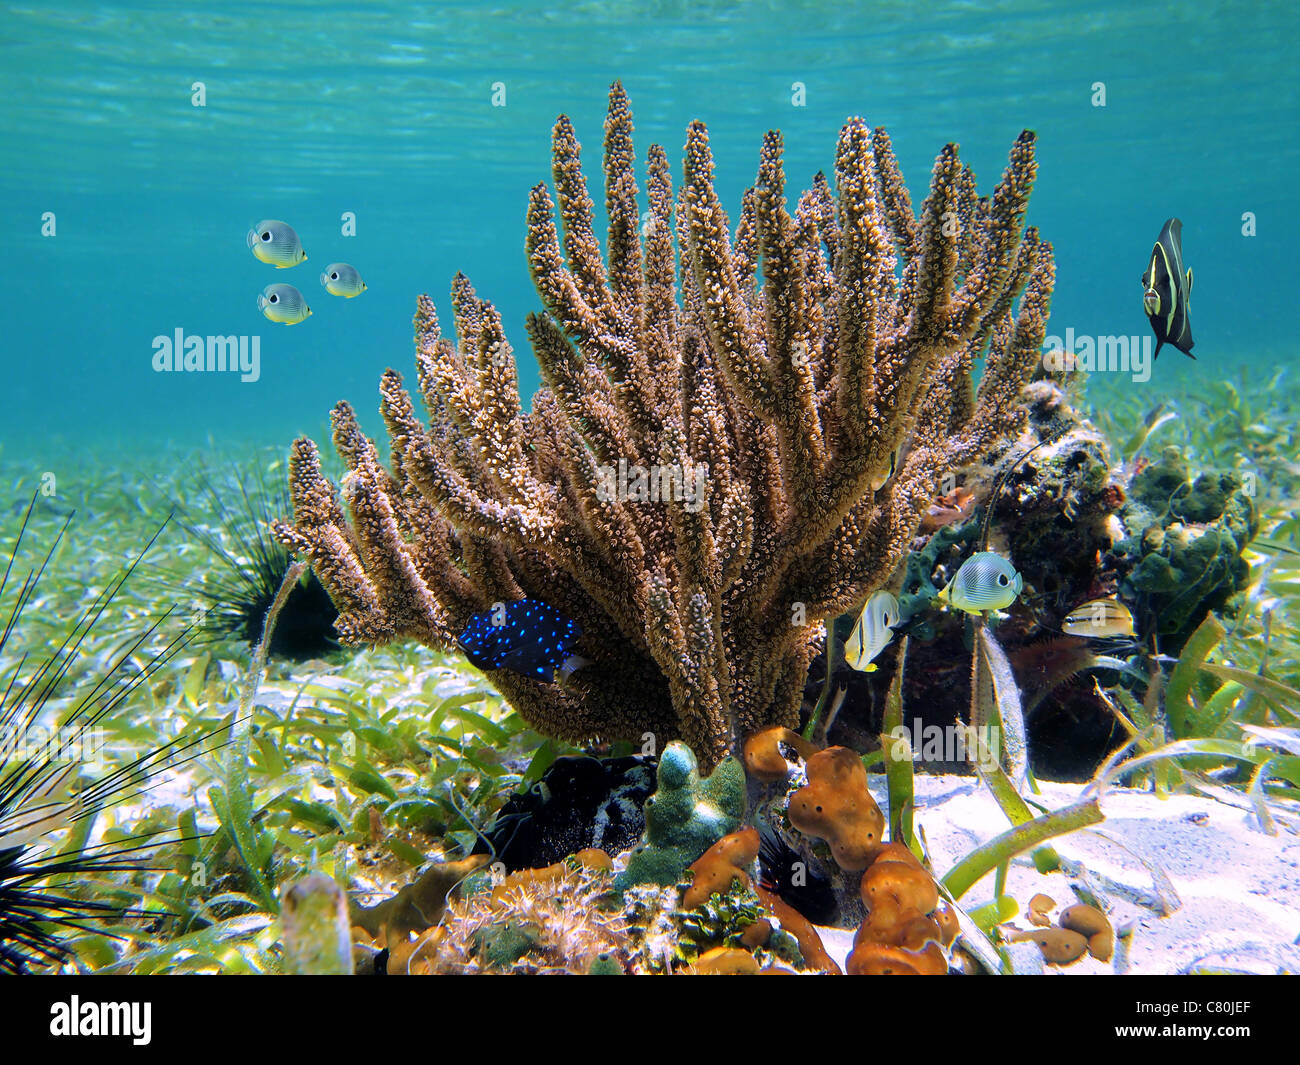 Underwater black sea rod coral and tropical fish in the Caribbean sea, Mayan Riviera, Mexico Stock Photo